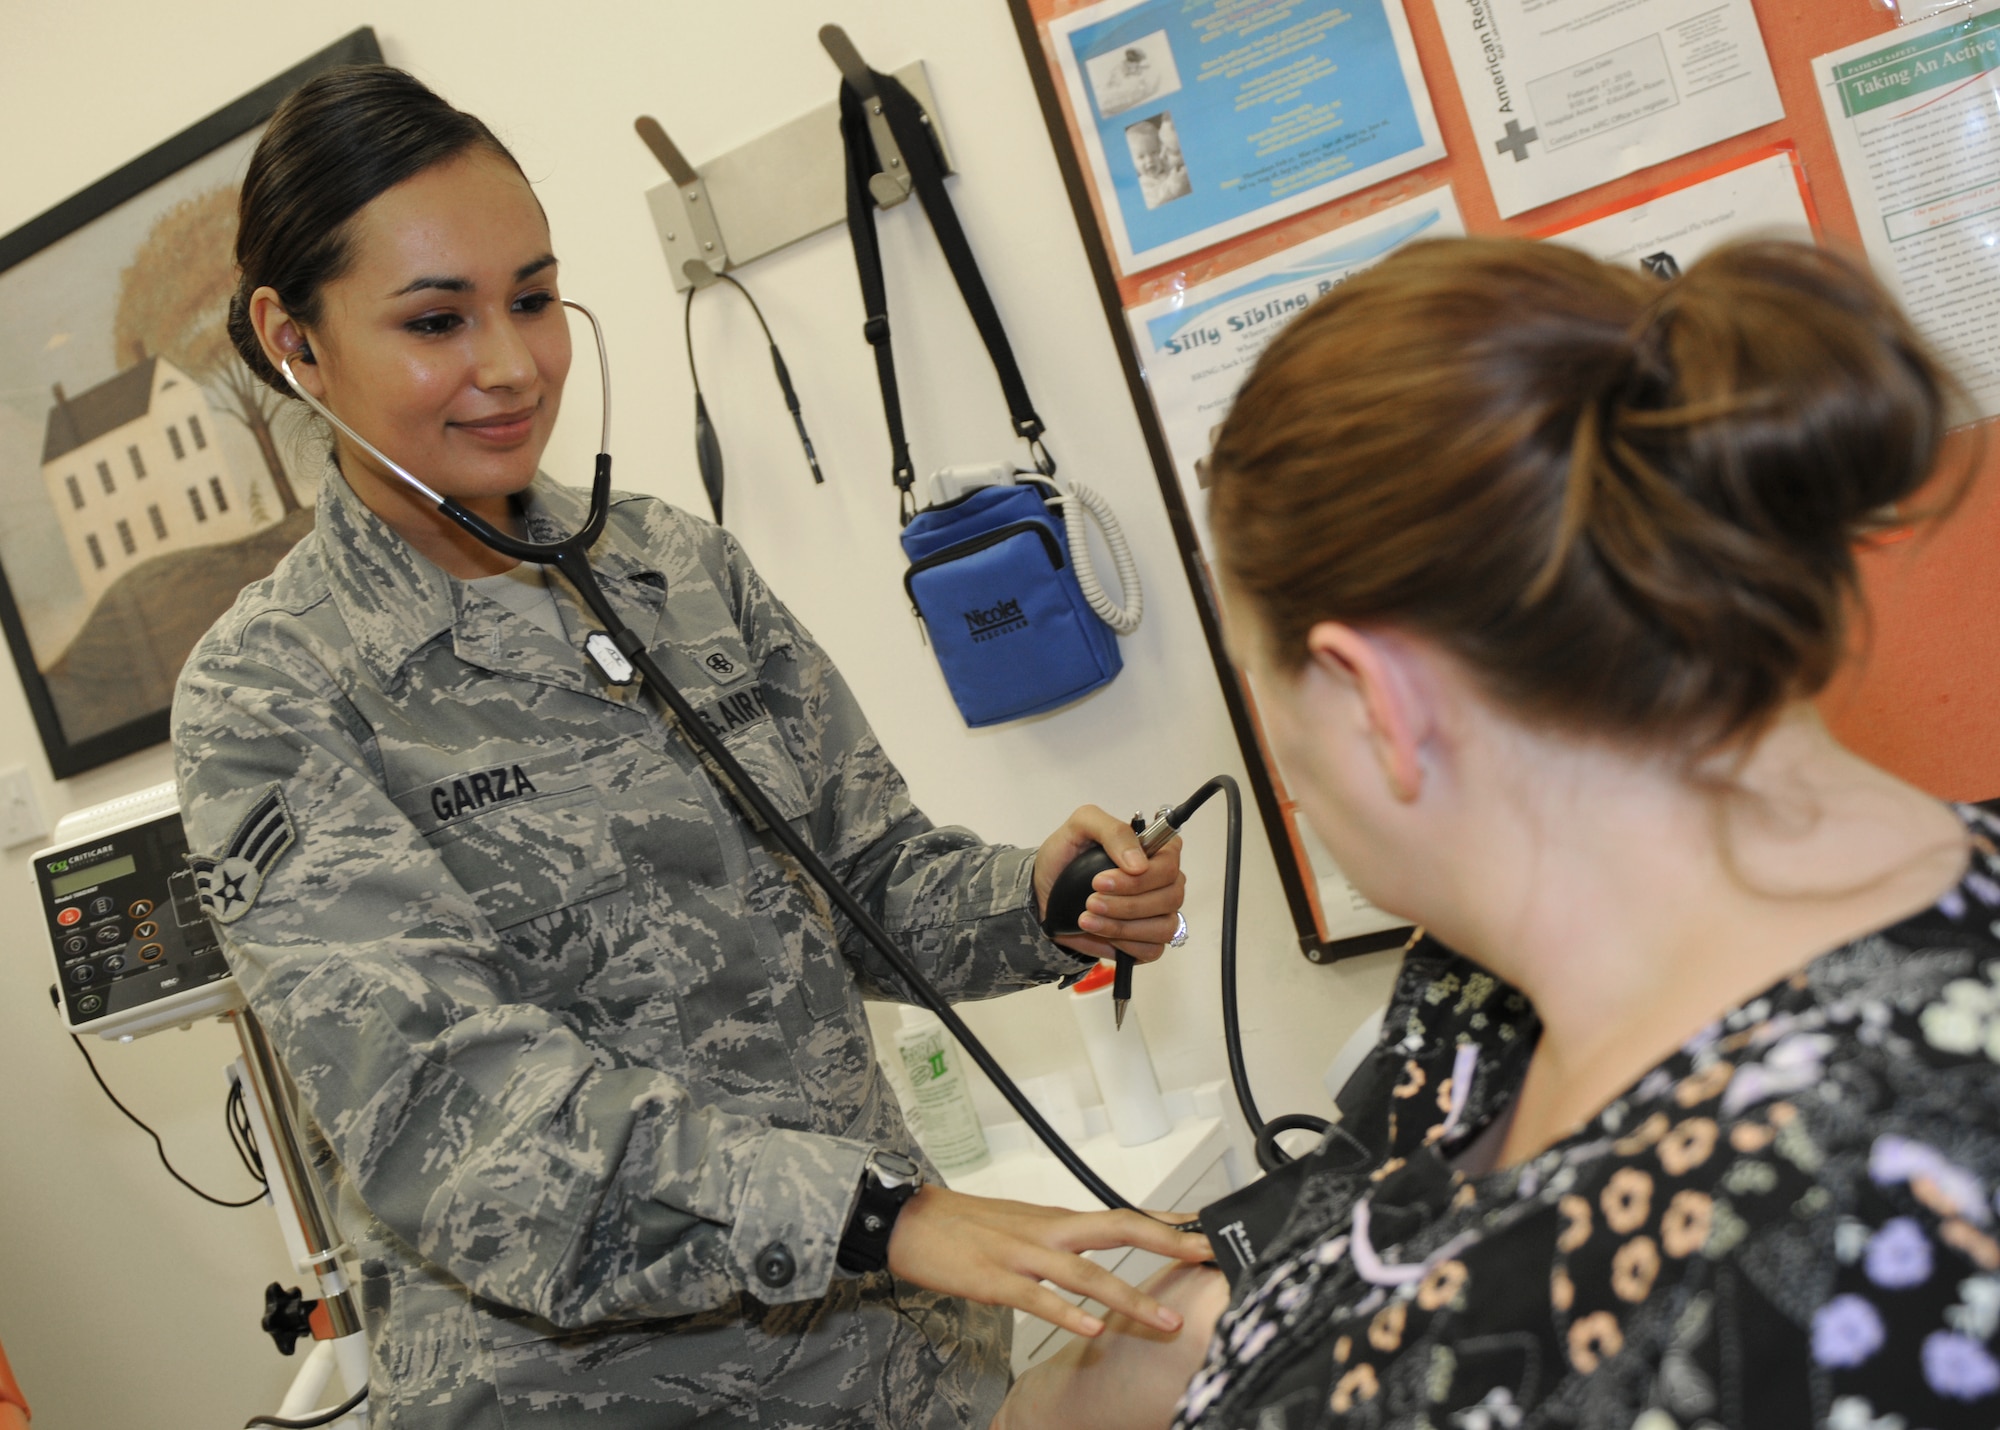 ROYAL AIR FORCE LAKENHEATH, England - Senior Airman Valeria Garza, 48th Women's Health Services aerospace medical technician, checks a patient's blood pressure on Sept. 2, 2011. Garza was nominated for a Liberty Spotlight because she displays the core value of "Service Before Self". (U.S. Air Force photo by Airman Cory Payne) 
